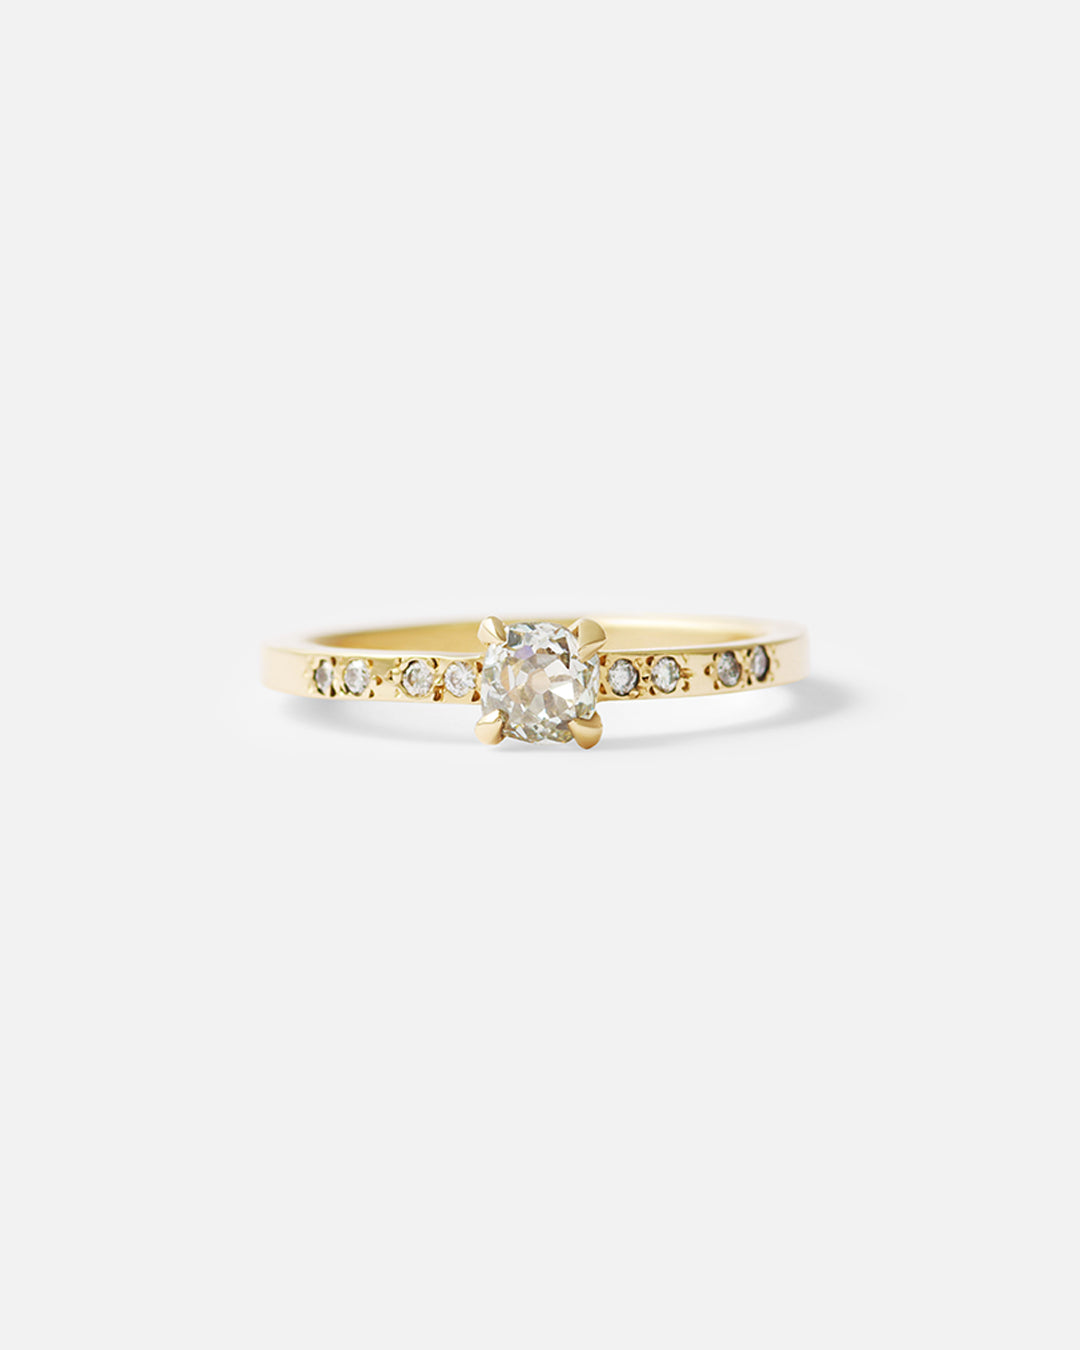 Solitaire Star Set Ring / Old Mine Cut Diamond By Nishi in Engagement Rings Category